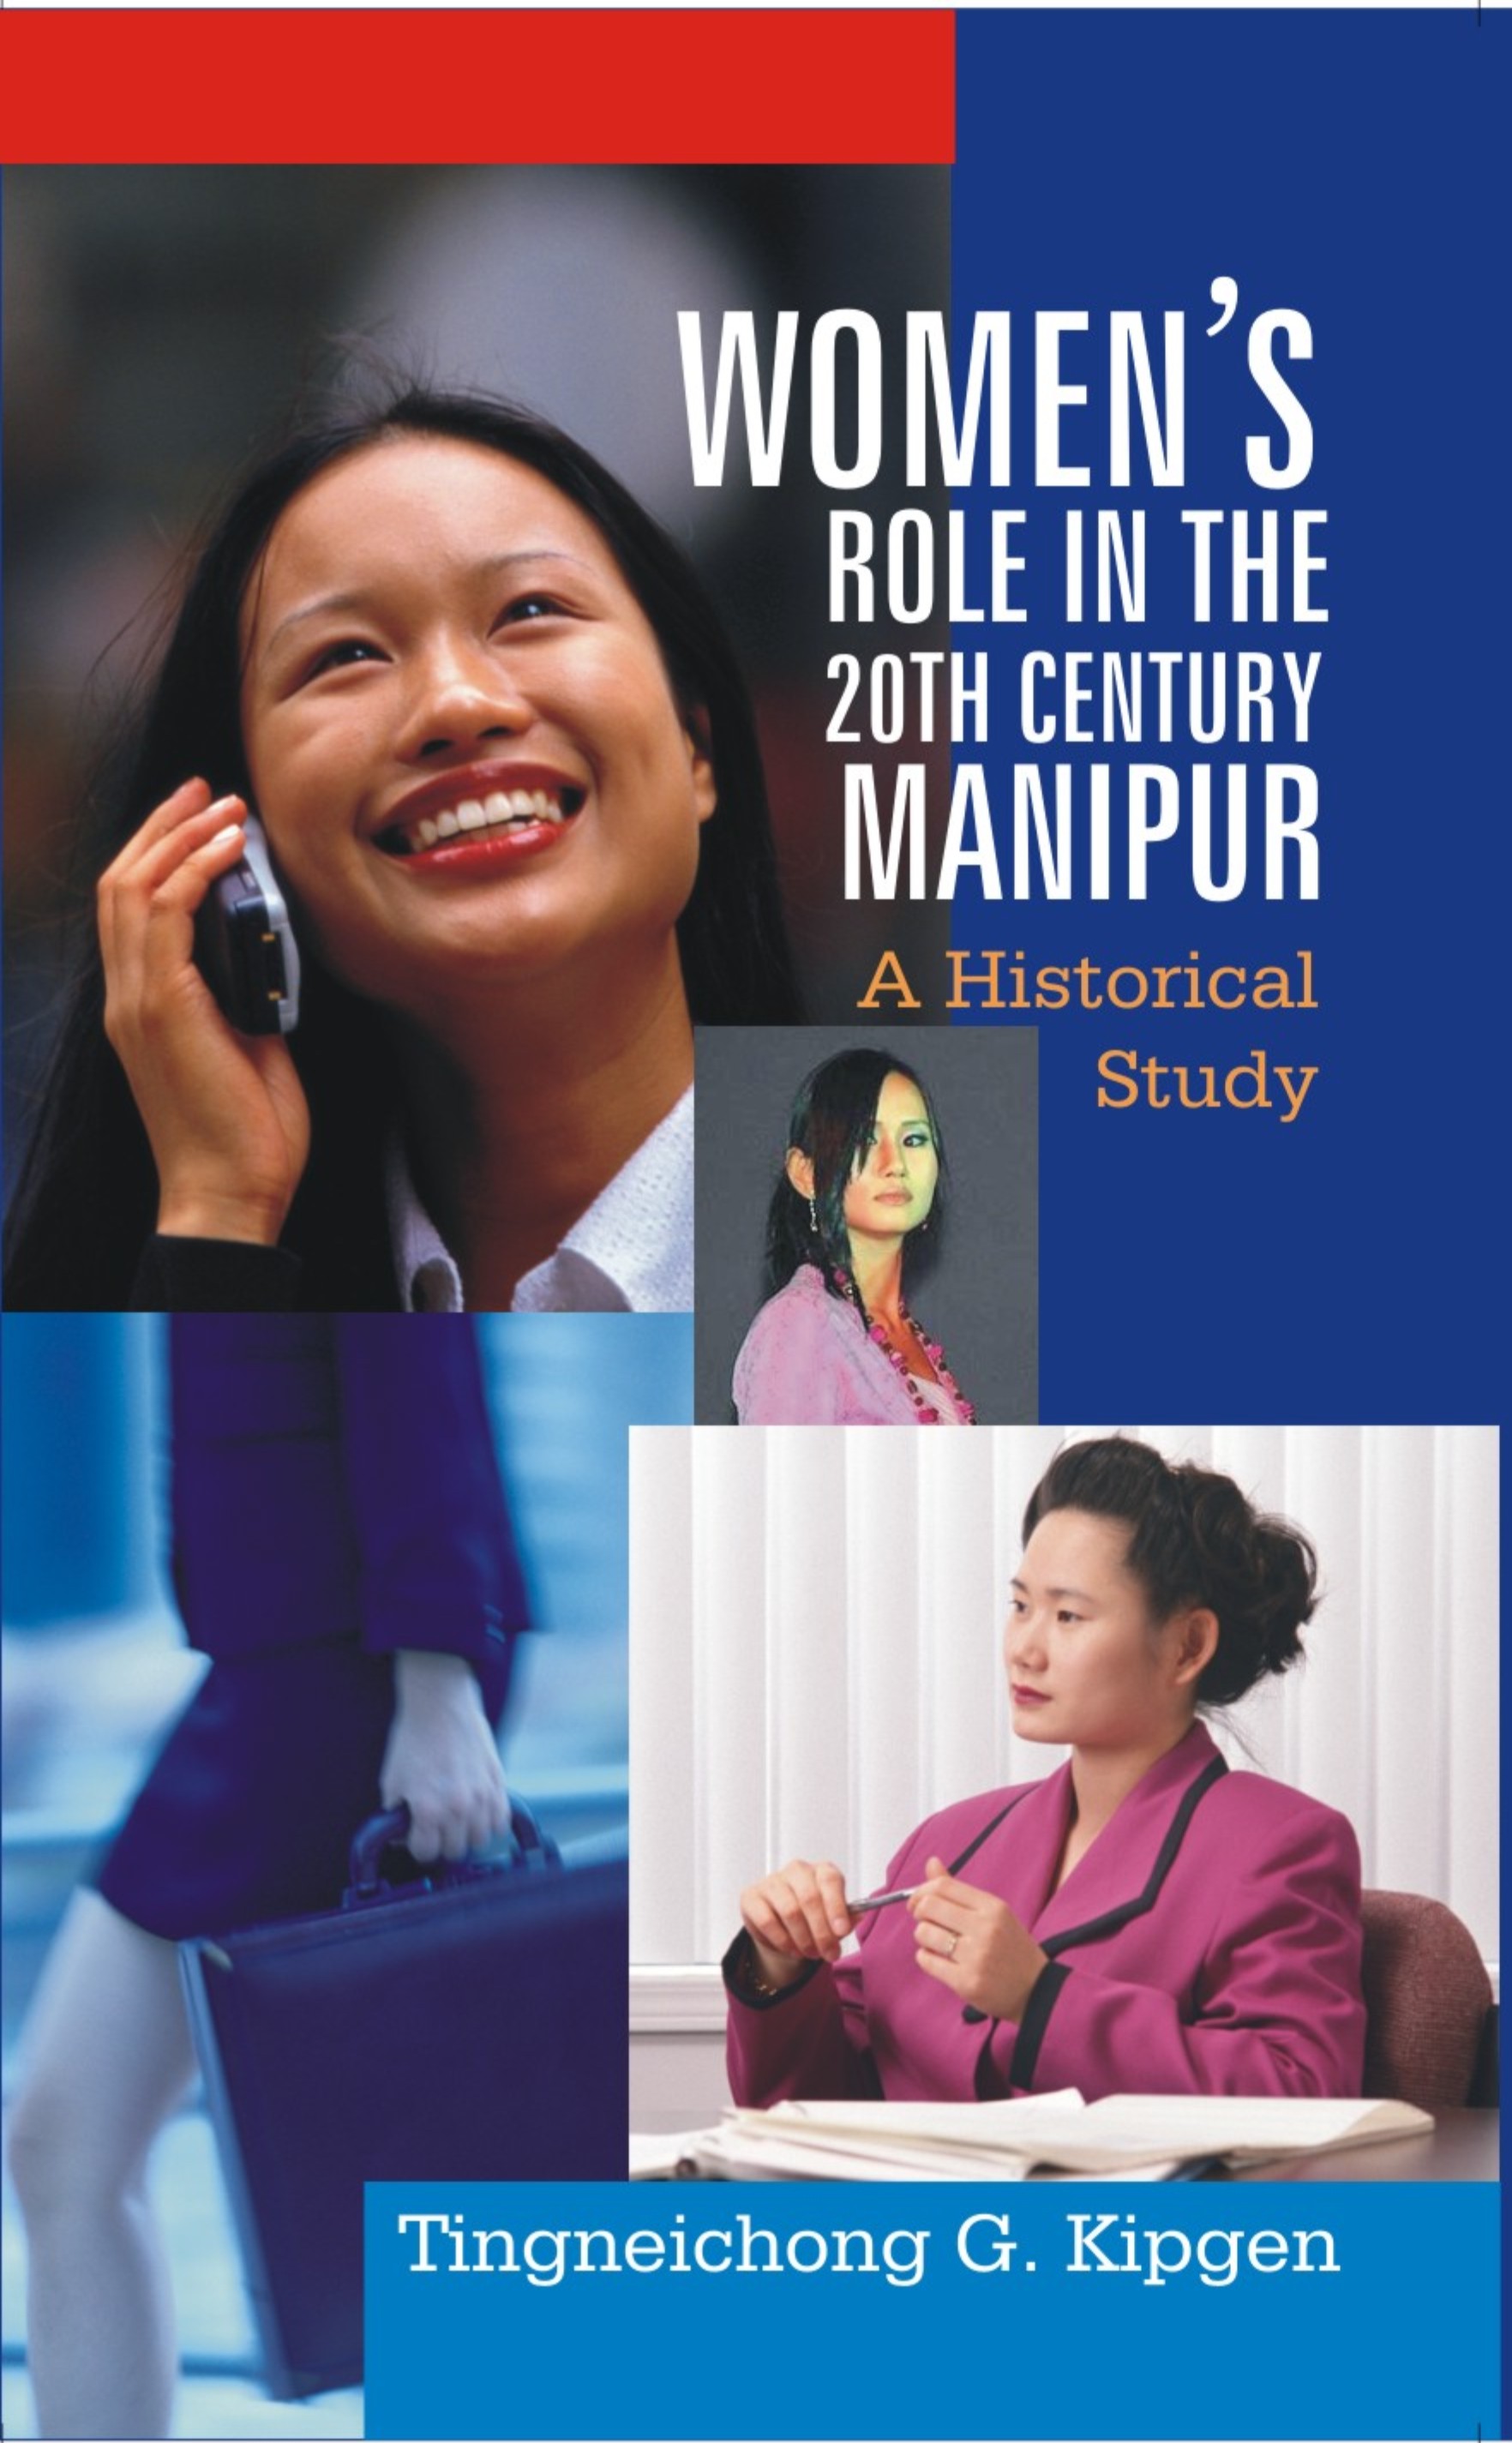 Women's Role in the 20Th Century, Manipur: a Historical Study [Hardcover] - Teighei Chong Gangte